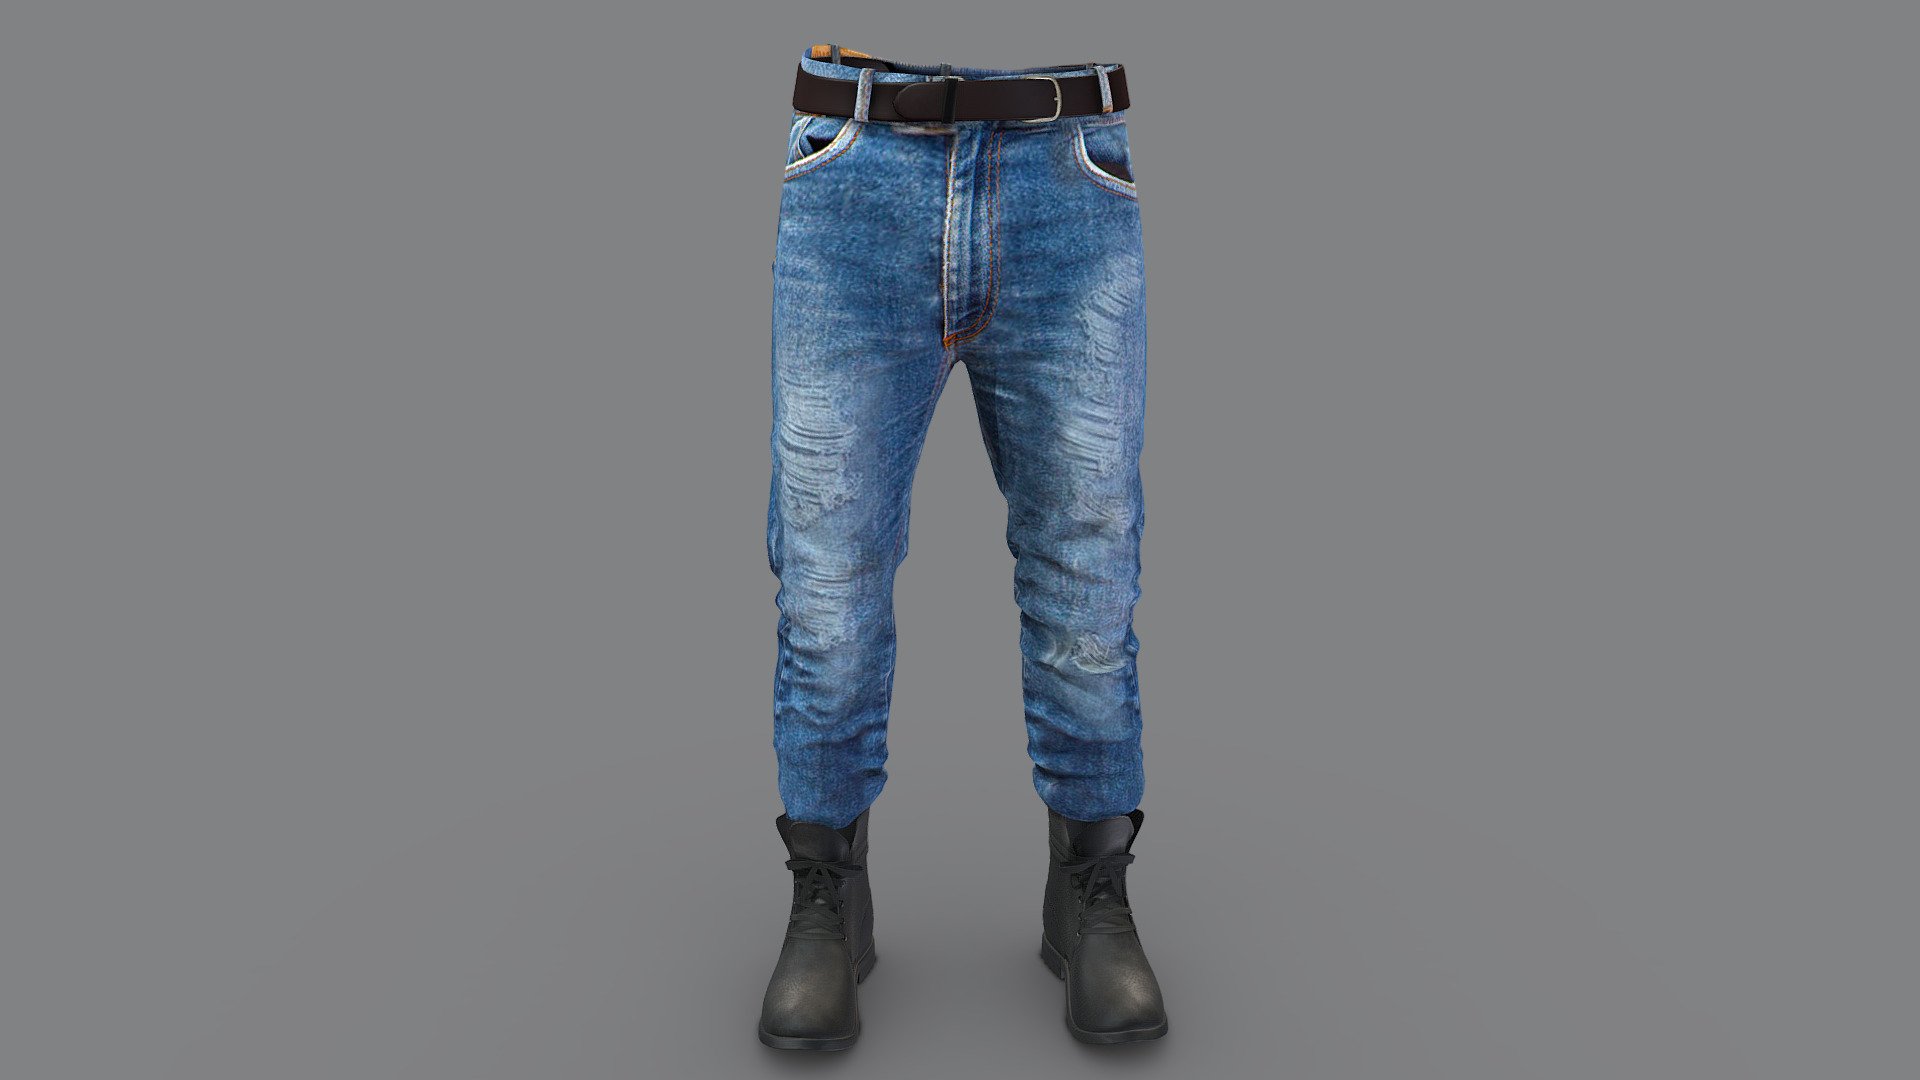 Boots &amp; pants are separate objects (right left boot share the same uv space)

Can fit to any character

Ready for games

Clean topology

No overlapping unwrapped UVs

High quality realistic textues

FBX, OBJ, gITF, USDZ, Ma, PSD (request other formats)

PBR or Classic

Please ask for any other questions

Type     user:3dia &ldquo;search term